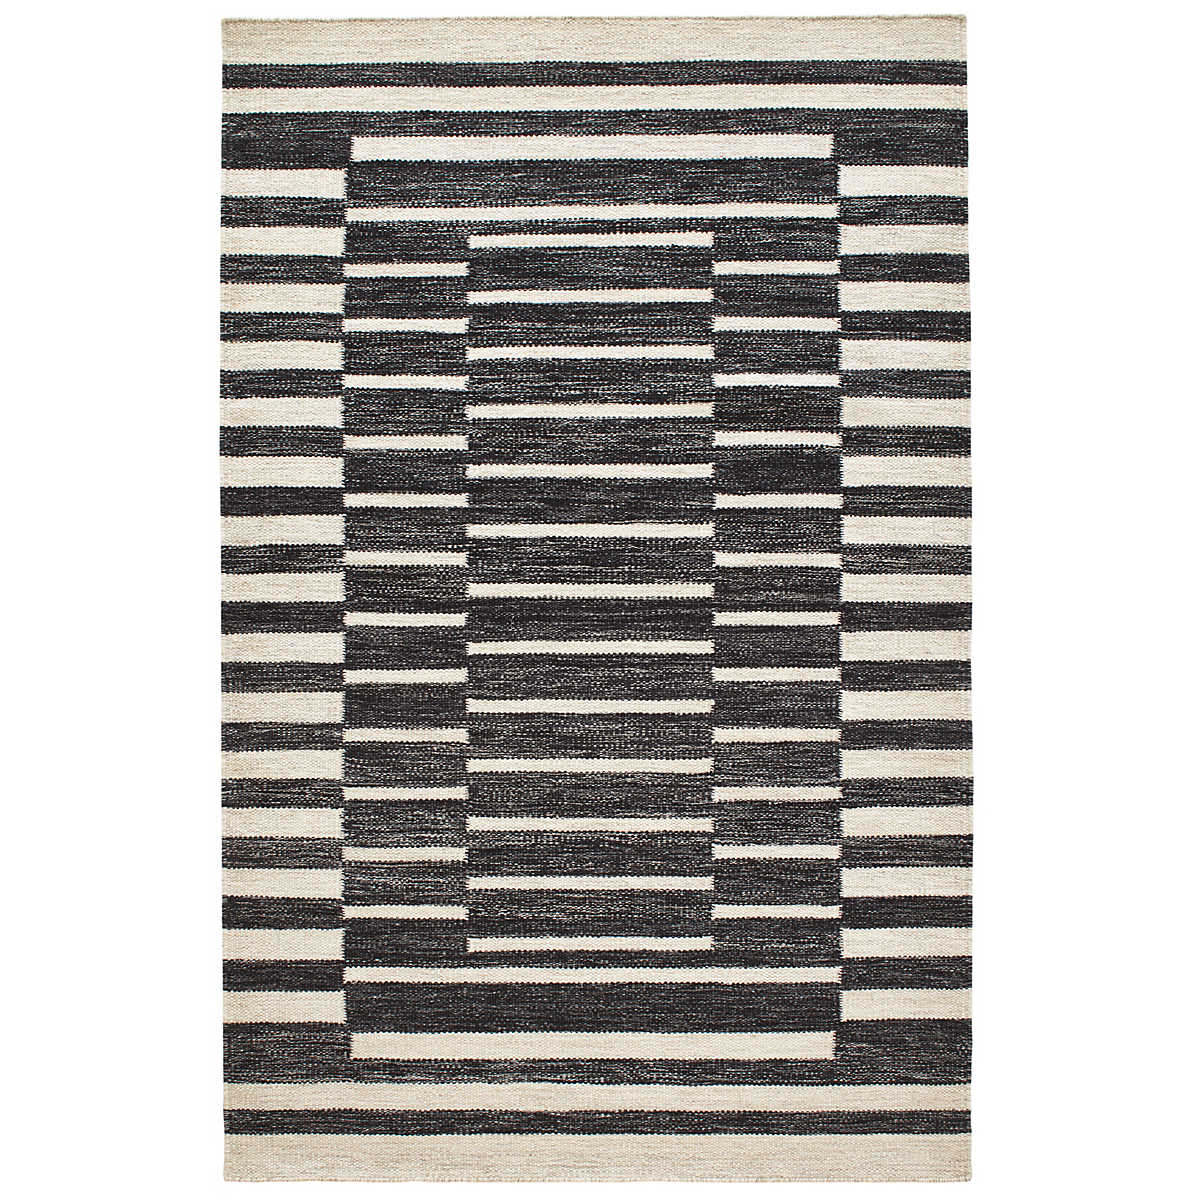 The Heights Charcoal Rug creates the illusion of layers with this gorgeous chunky, flatwoven wool rug. Concentric rectangles of offset ladder stripes make a bold graphic statement. Hand-loomed by artisans from undyed natural fleece wool in marled shades of Charcoal and Ivory. Amethyst Home provides interior design services, furniture, rugs, and lighting in the Omaha metro area.